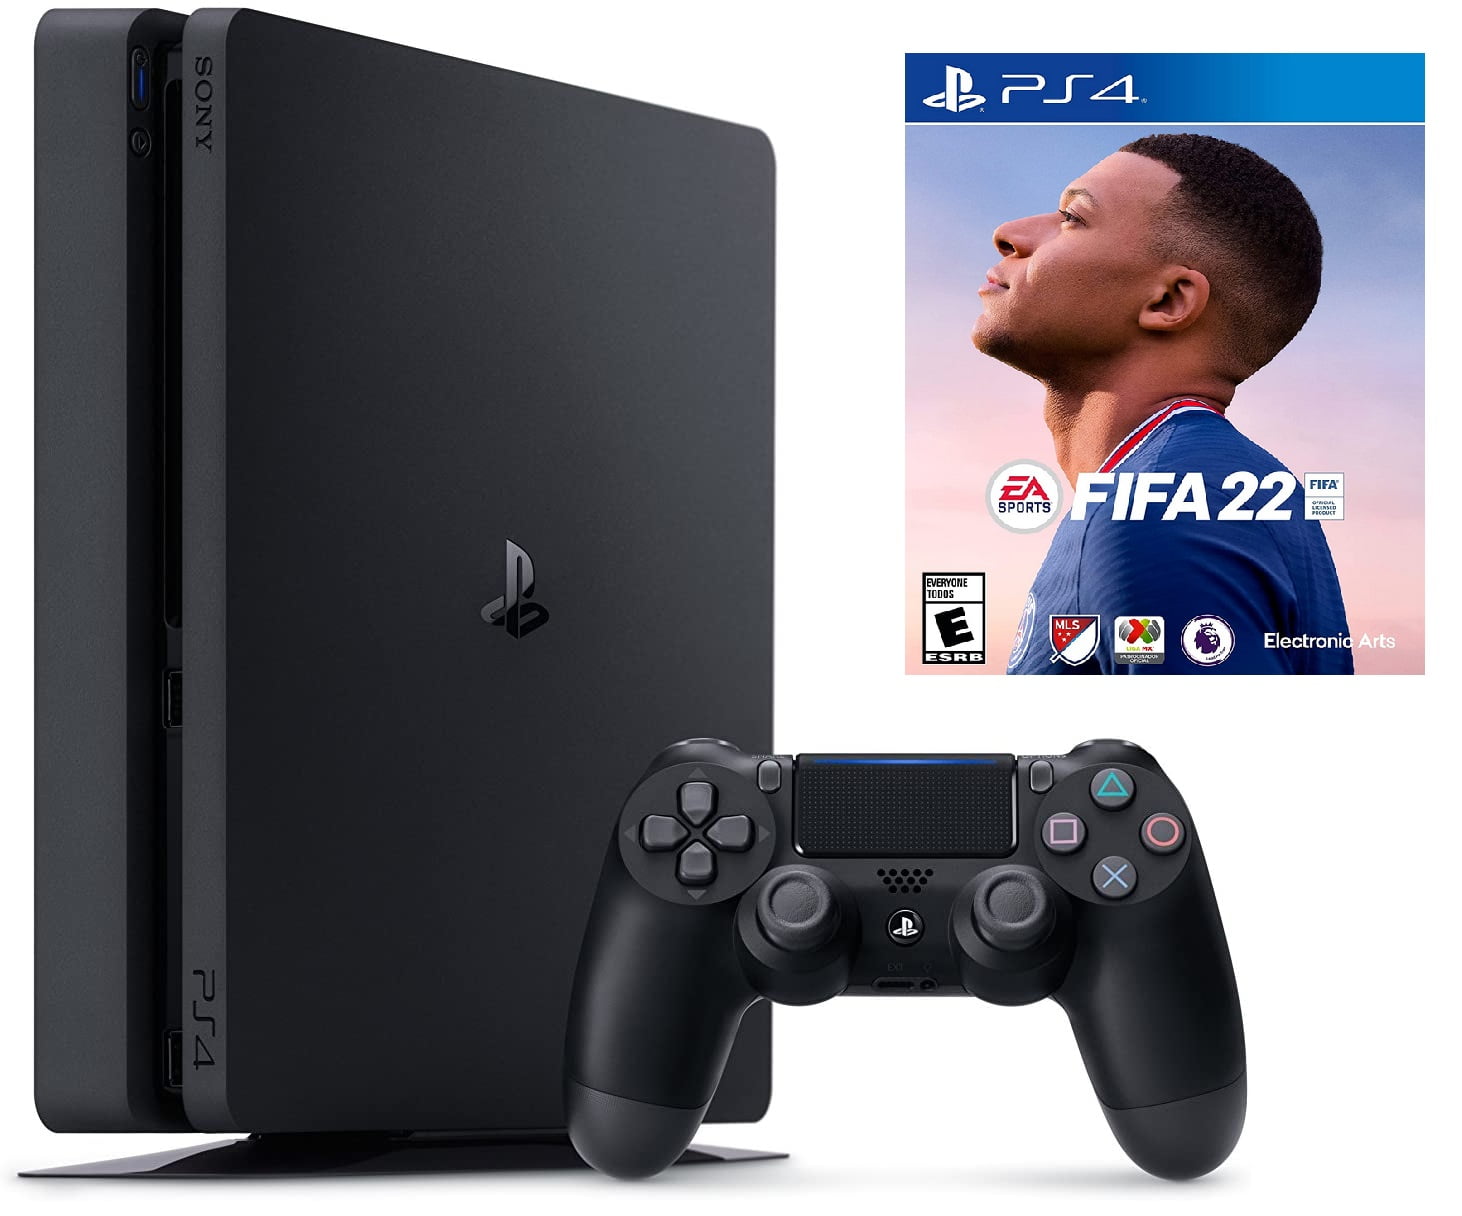 TEC Sony PlayStation 4 1TB Slim Gaming Console Bundle with FIFA 22 Game